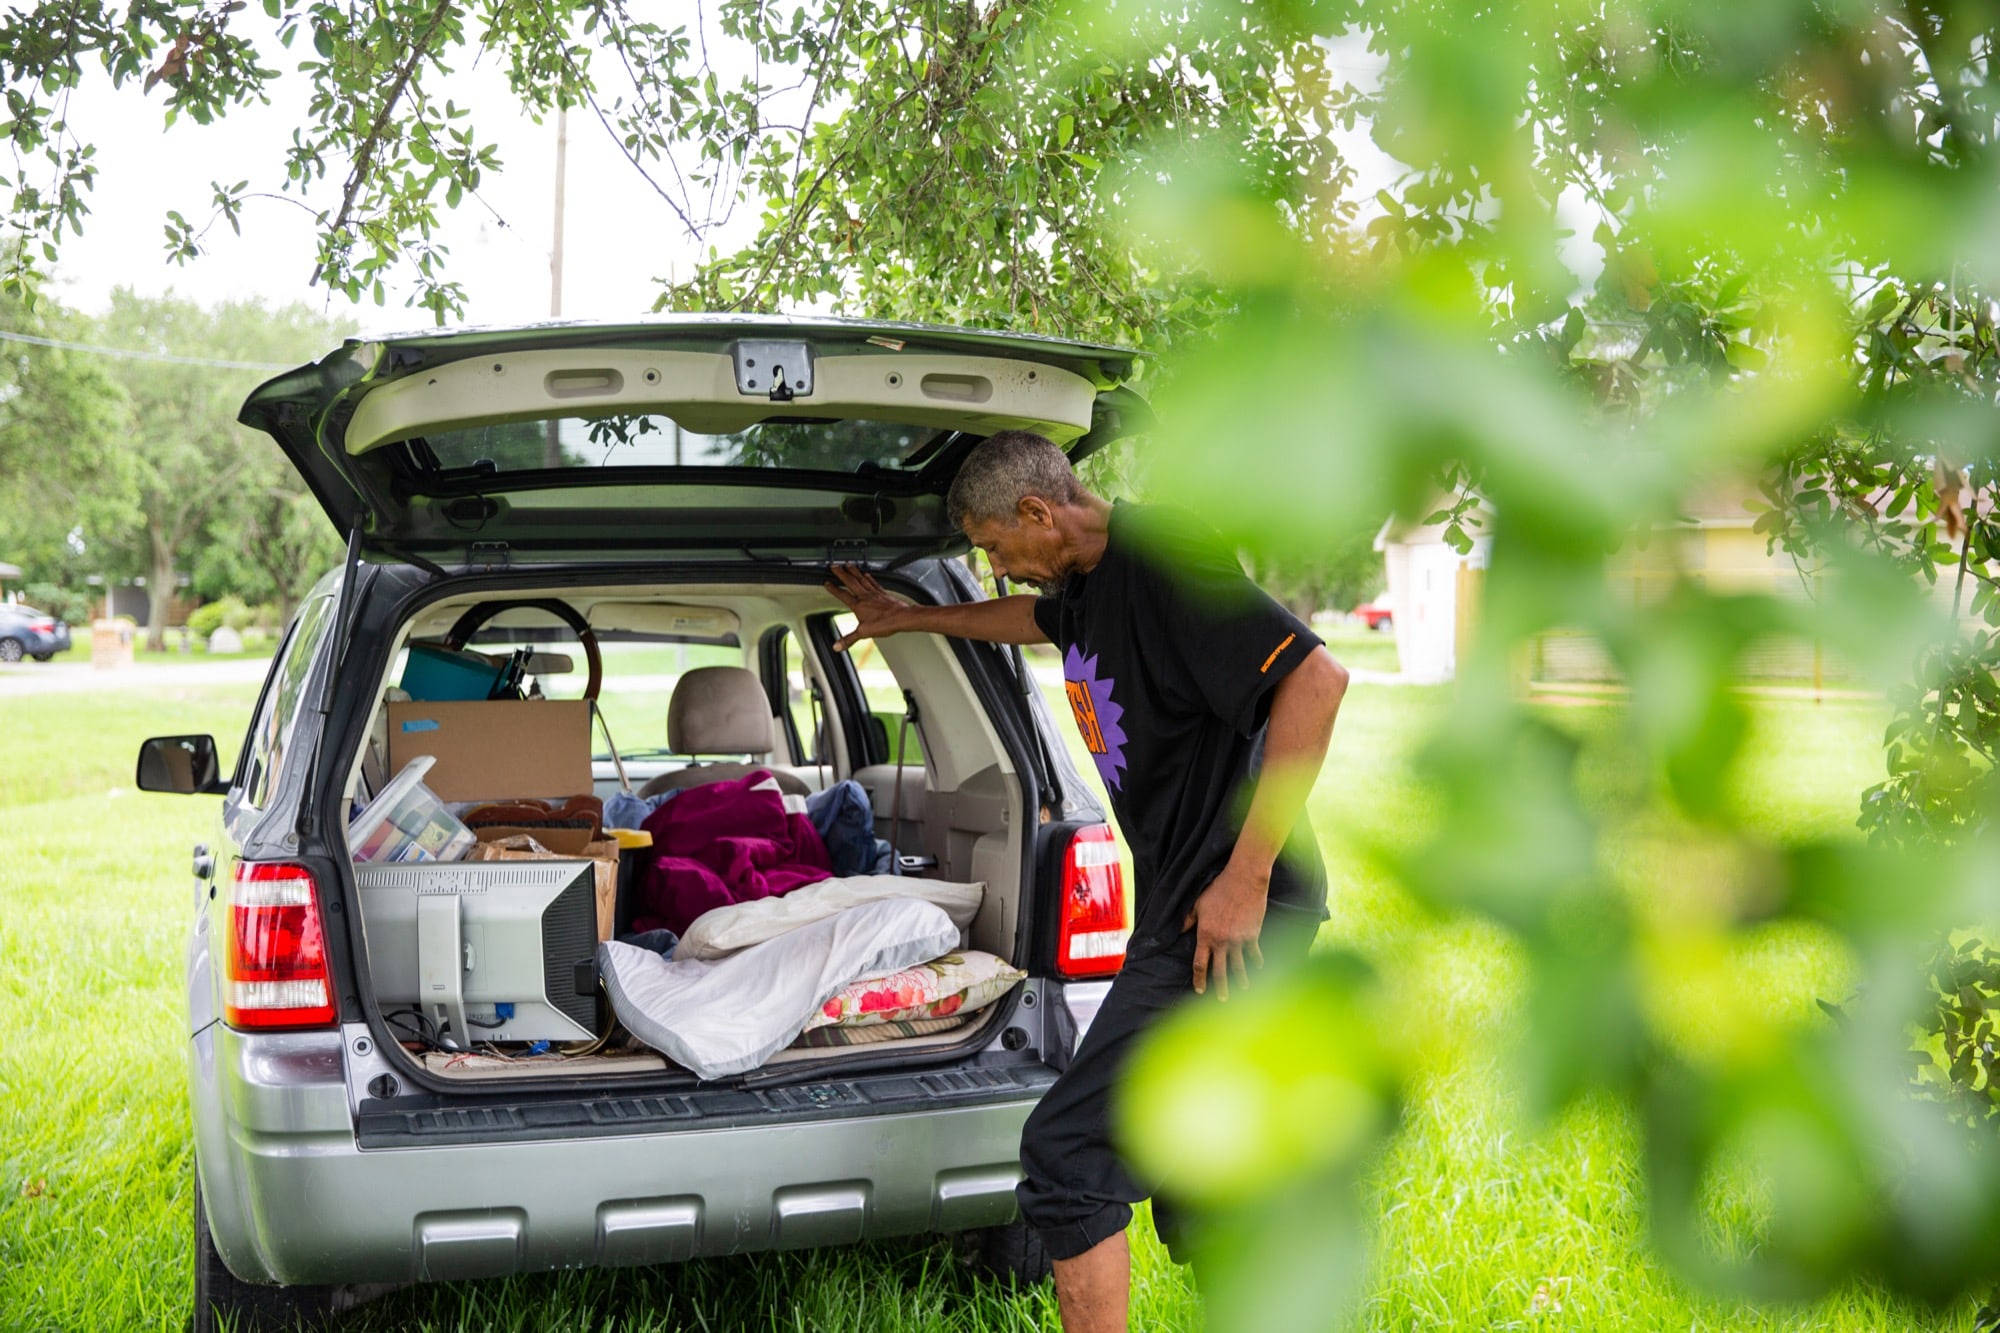 Benjamin Davis, who’s at least 6-foot tall, sleeps in a borrowed car that also holds his remaining possessions.  He moves all of his belongings to one side and lays down comforters and pillows to make the spot between the trunk and back seat more comfortable. (Stacy Fernández/News21)